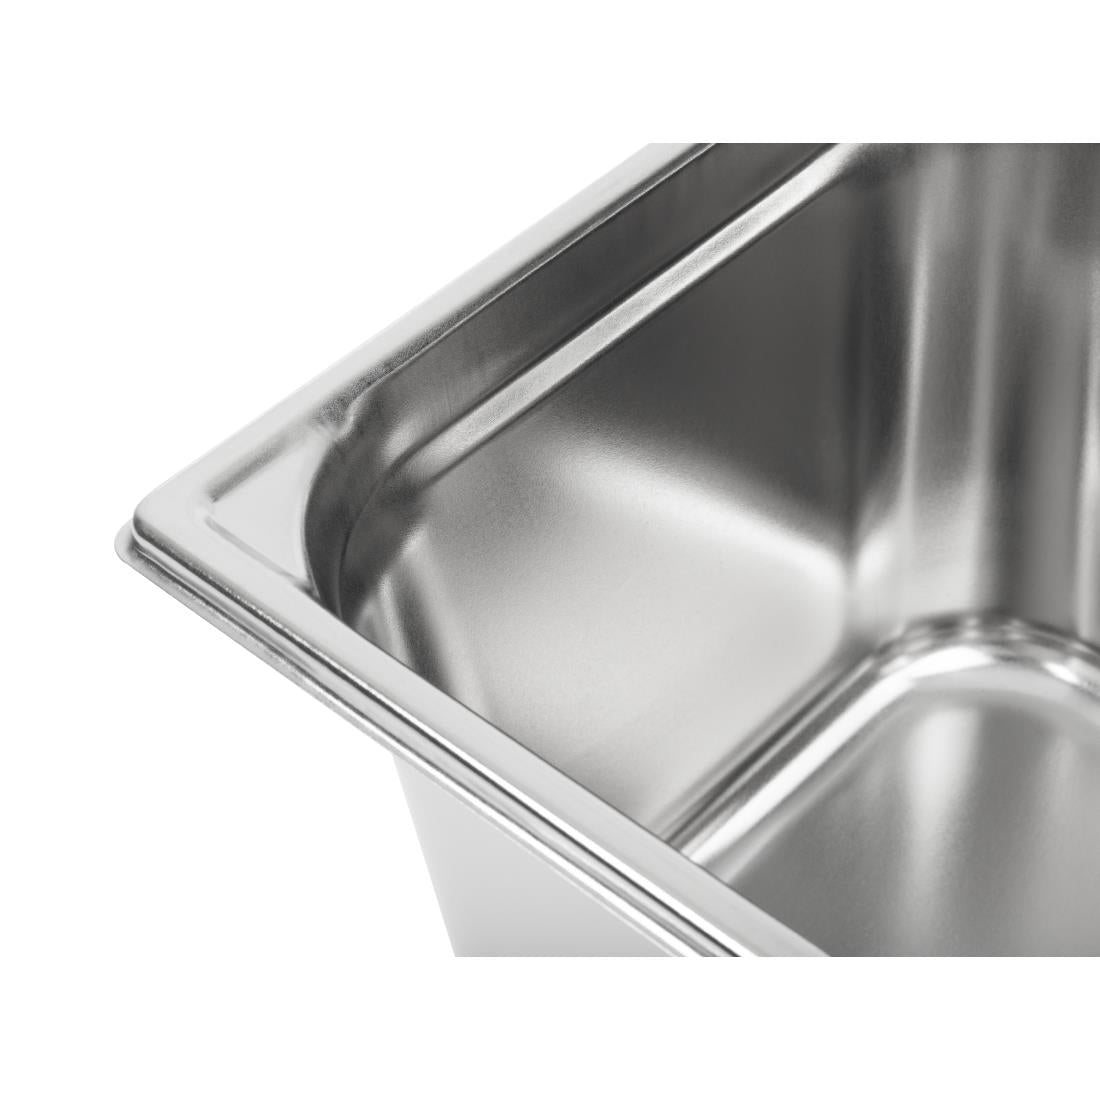 Bourgeat Stainless Steel 1/2 Gastronorm Pan 200mm JD Catering Equipment Solutions Ltd